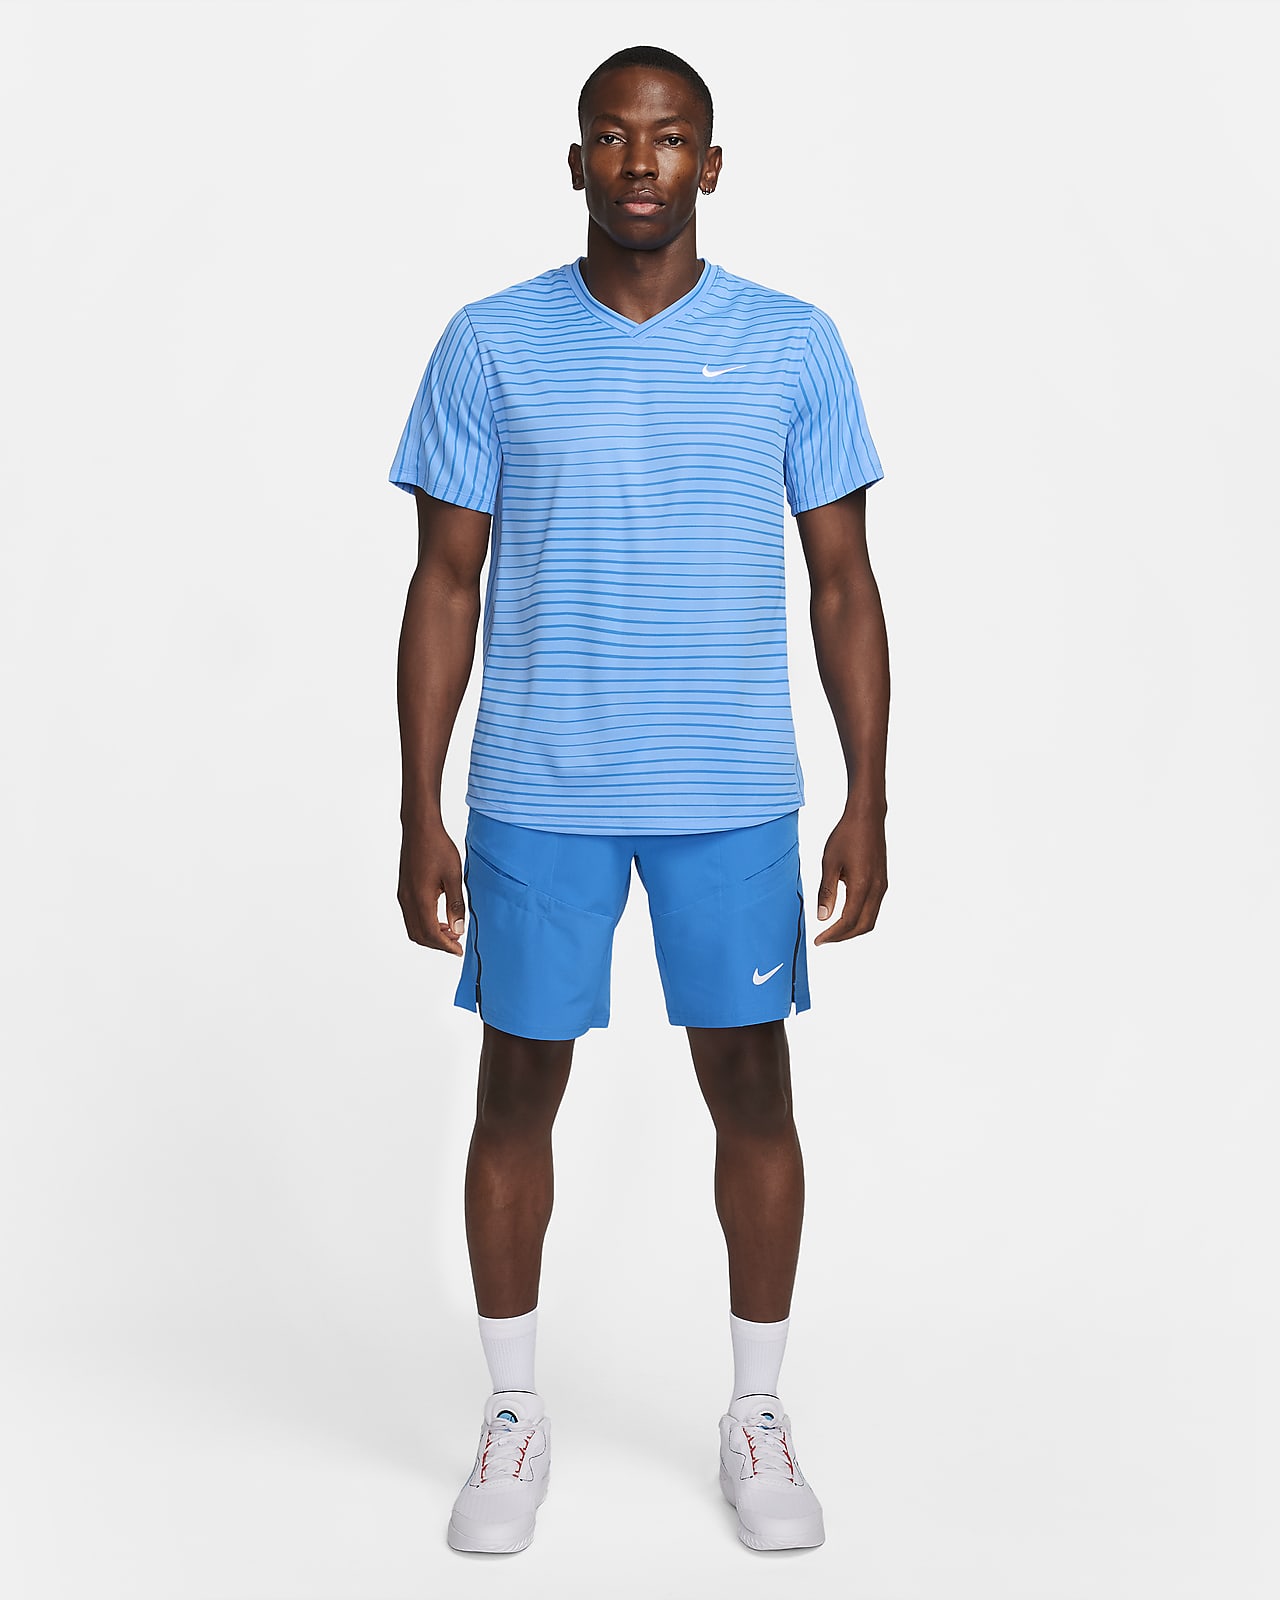 https://static.nike.com/a/images/t_PDP_1280_v1/f_auto,q_auto:eco/9aa88da6-63b0-4f6f-bdce-cd0e3b9d27f3/nikecourt-dri-fit-victory-tennis-top-nzG0sw.png